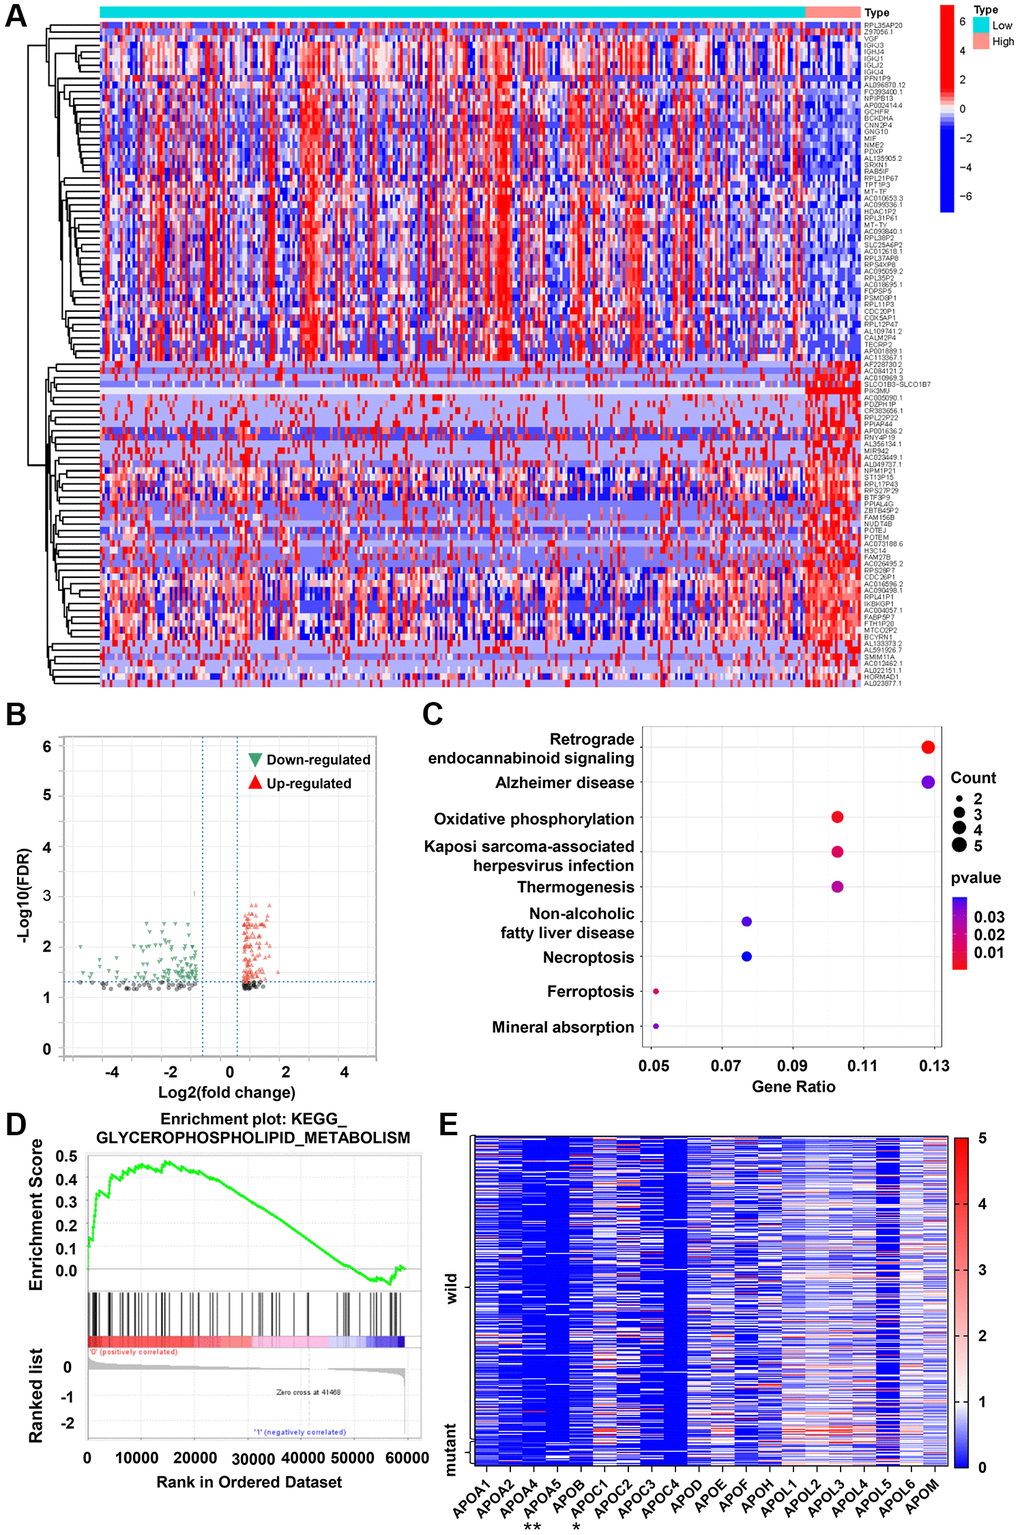 PIK3CA mutant CRC tissues exhibits increased APOA5 expression. (A) Heatmap for DEGs generated by comparison of wild-type vs. mutant PIK3CA group in colon cancer samples. The row name of heatmap is the gene name, and the column represents each sample in the cohort. (B) Volcano plot for the DEGs. The blue and red dots represented the significantly downregulated and upregulated genes, respectively; and the gray dots represented the genes without differential expression. DEGs were determined by Wilcoxon rank sum test with FDR 1 as the significance threshold. (C) KEGG enrichment analysis for 244 DEGs, terms with p and q D) Enriched gene sets in C2 collection by the PIK3CA mutant samples expression. Up-regulated genes are located on the left which approach the origin of the coordinates (p q E) Differentiated expression of apolipoproteins in the wild-type and mutant PIK3CA sample. **p *p = 0.016 by Wilcoxon rank sum test.